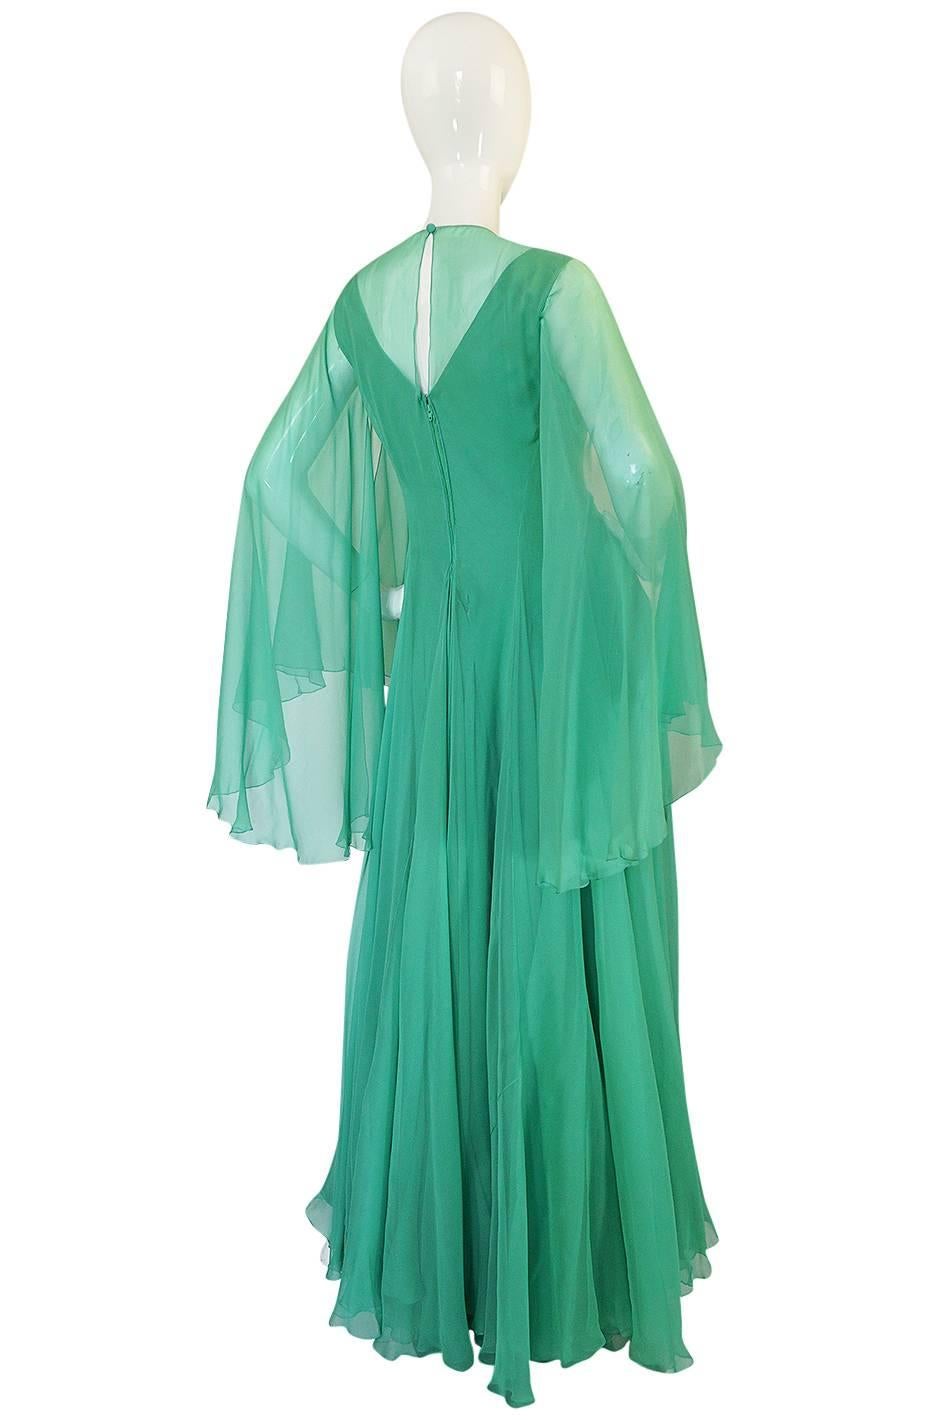 This stunning dress is one of the most incredible Stavropoulos gowns I have had in the shop. I love the lightness and airiness of it that created by the layers and layers of the mint green silk chiffon. In person, the layers give it a depth not